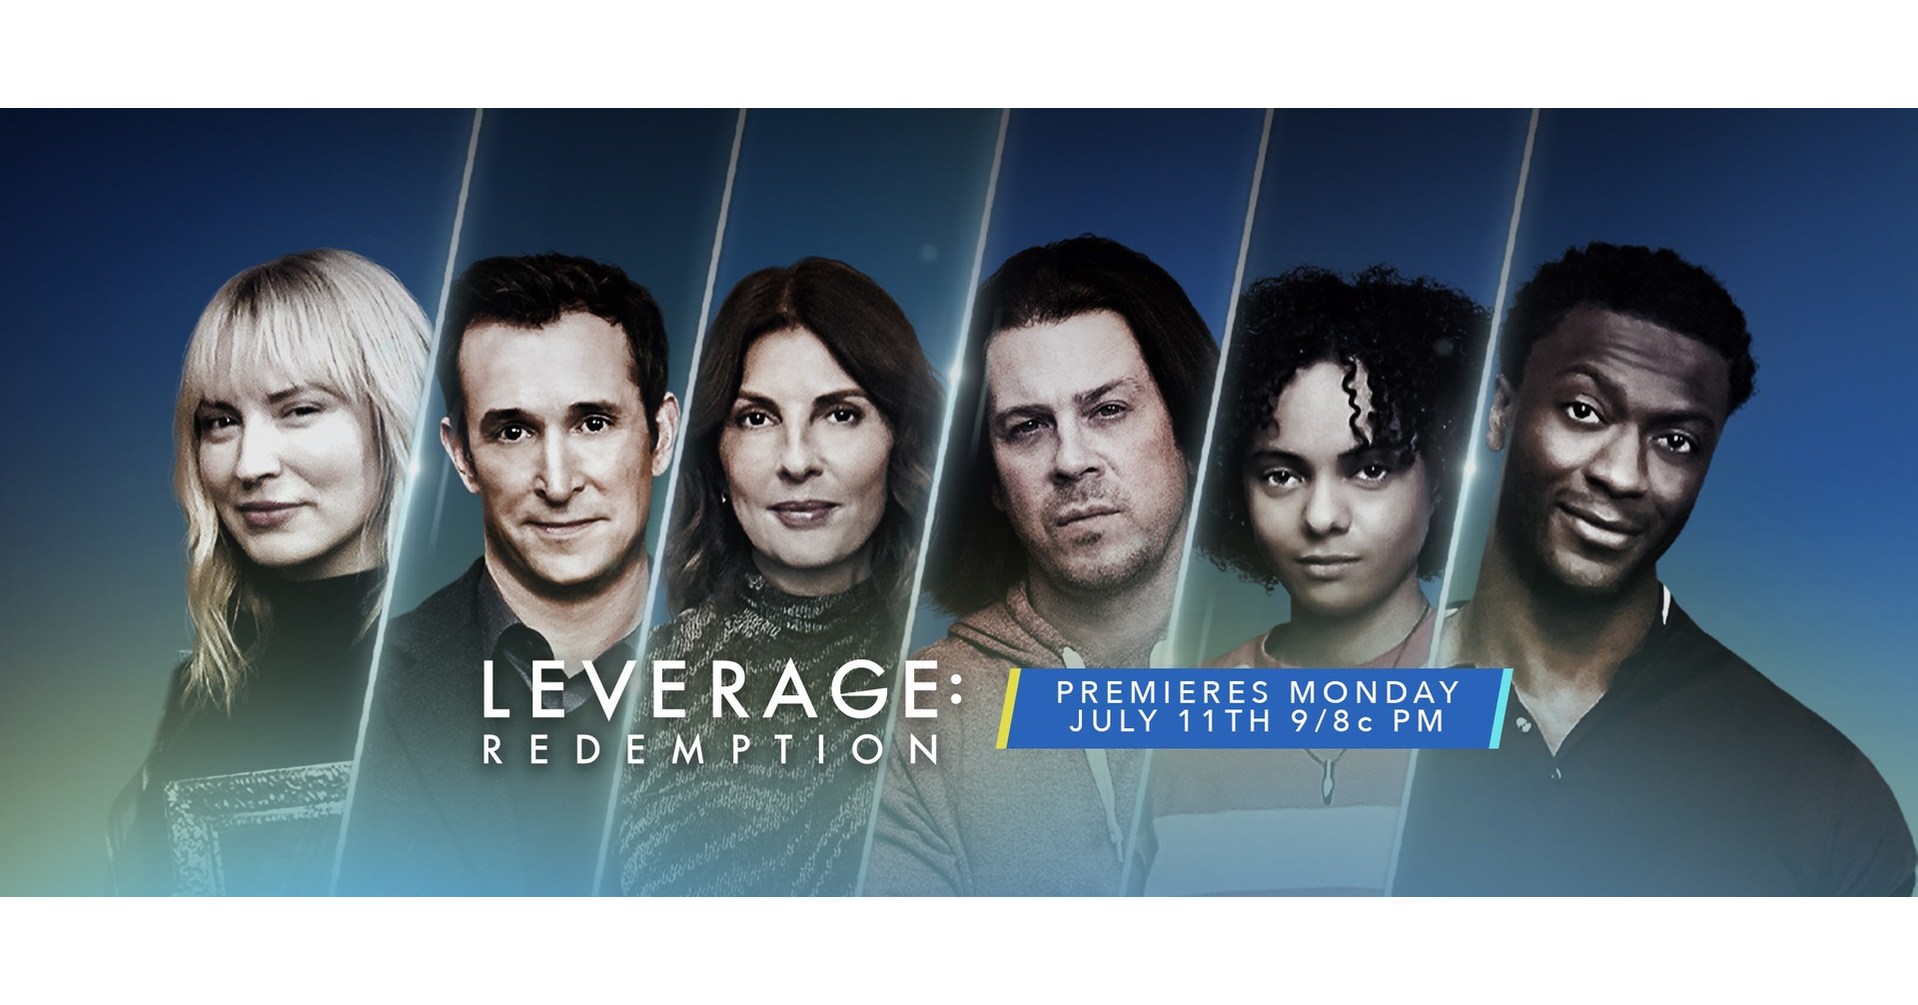 Why Hardison Left The Team In Leverage: Redemption